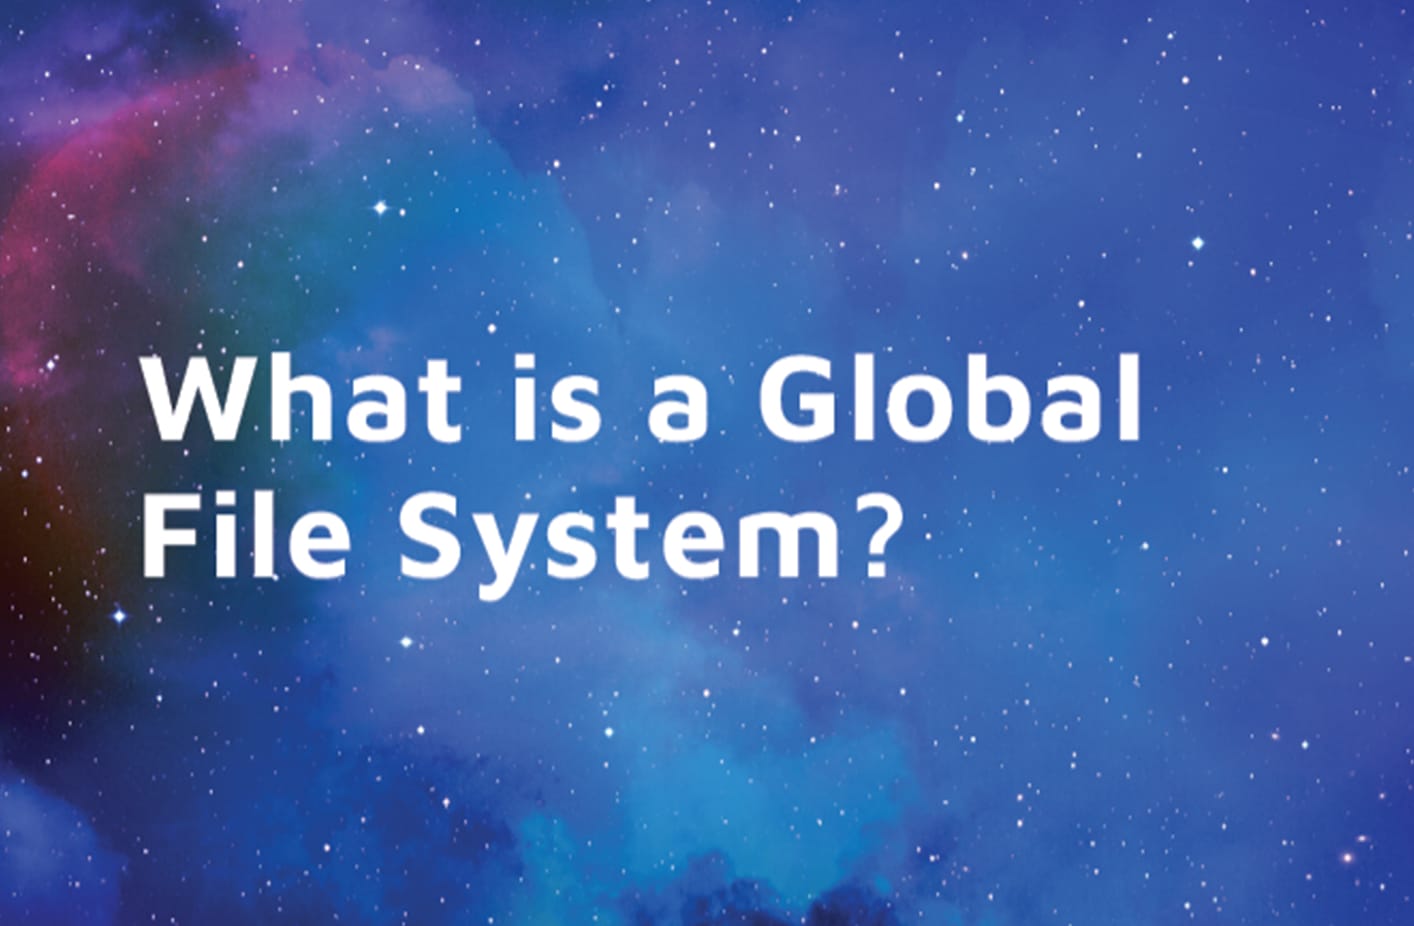 What is a Global File System